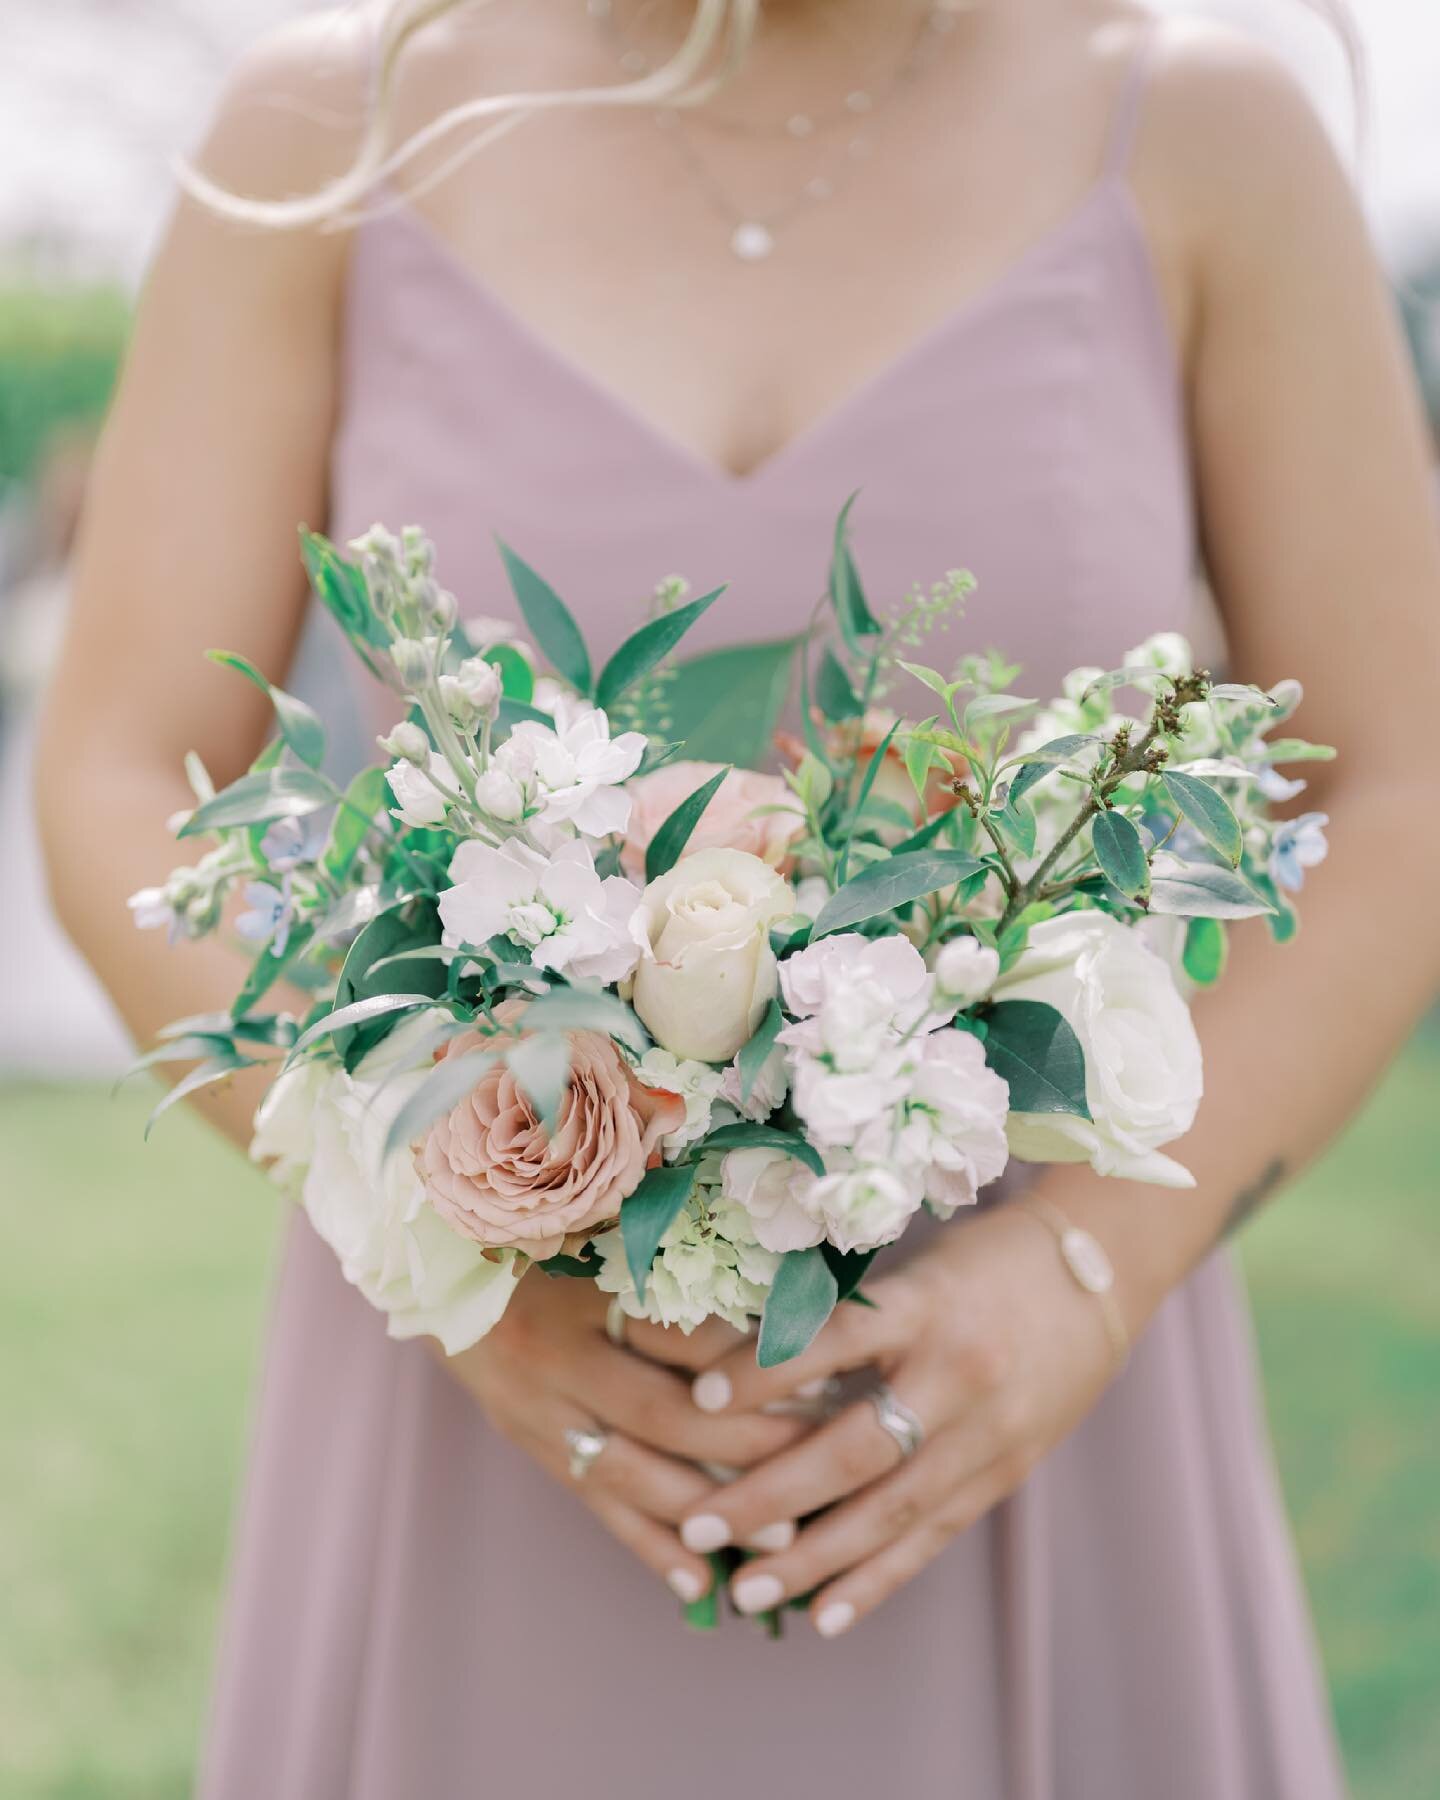 On the way to an engagement shoot that I have been looking forward to so much! 
This image is a forever favorite captured by Adrienne, talented associate for Haint Blue - I love the way that curated florals shine against the backdrop of bridesmaids d